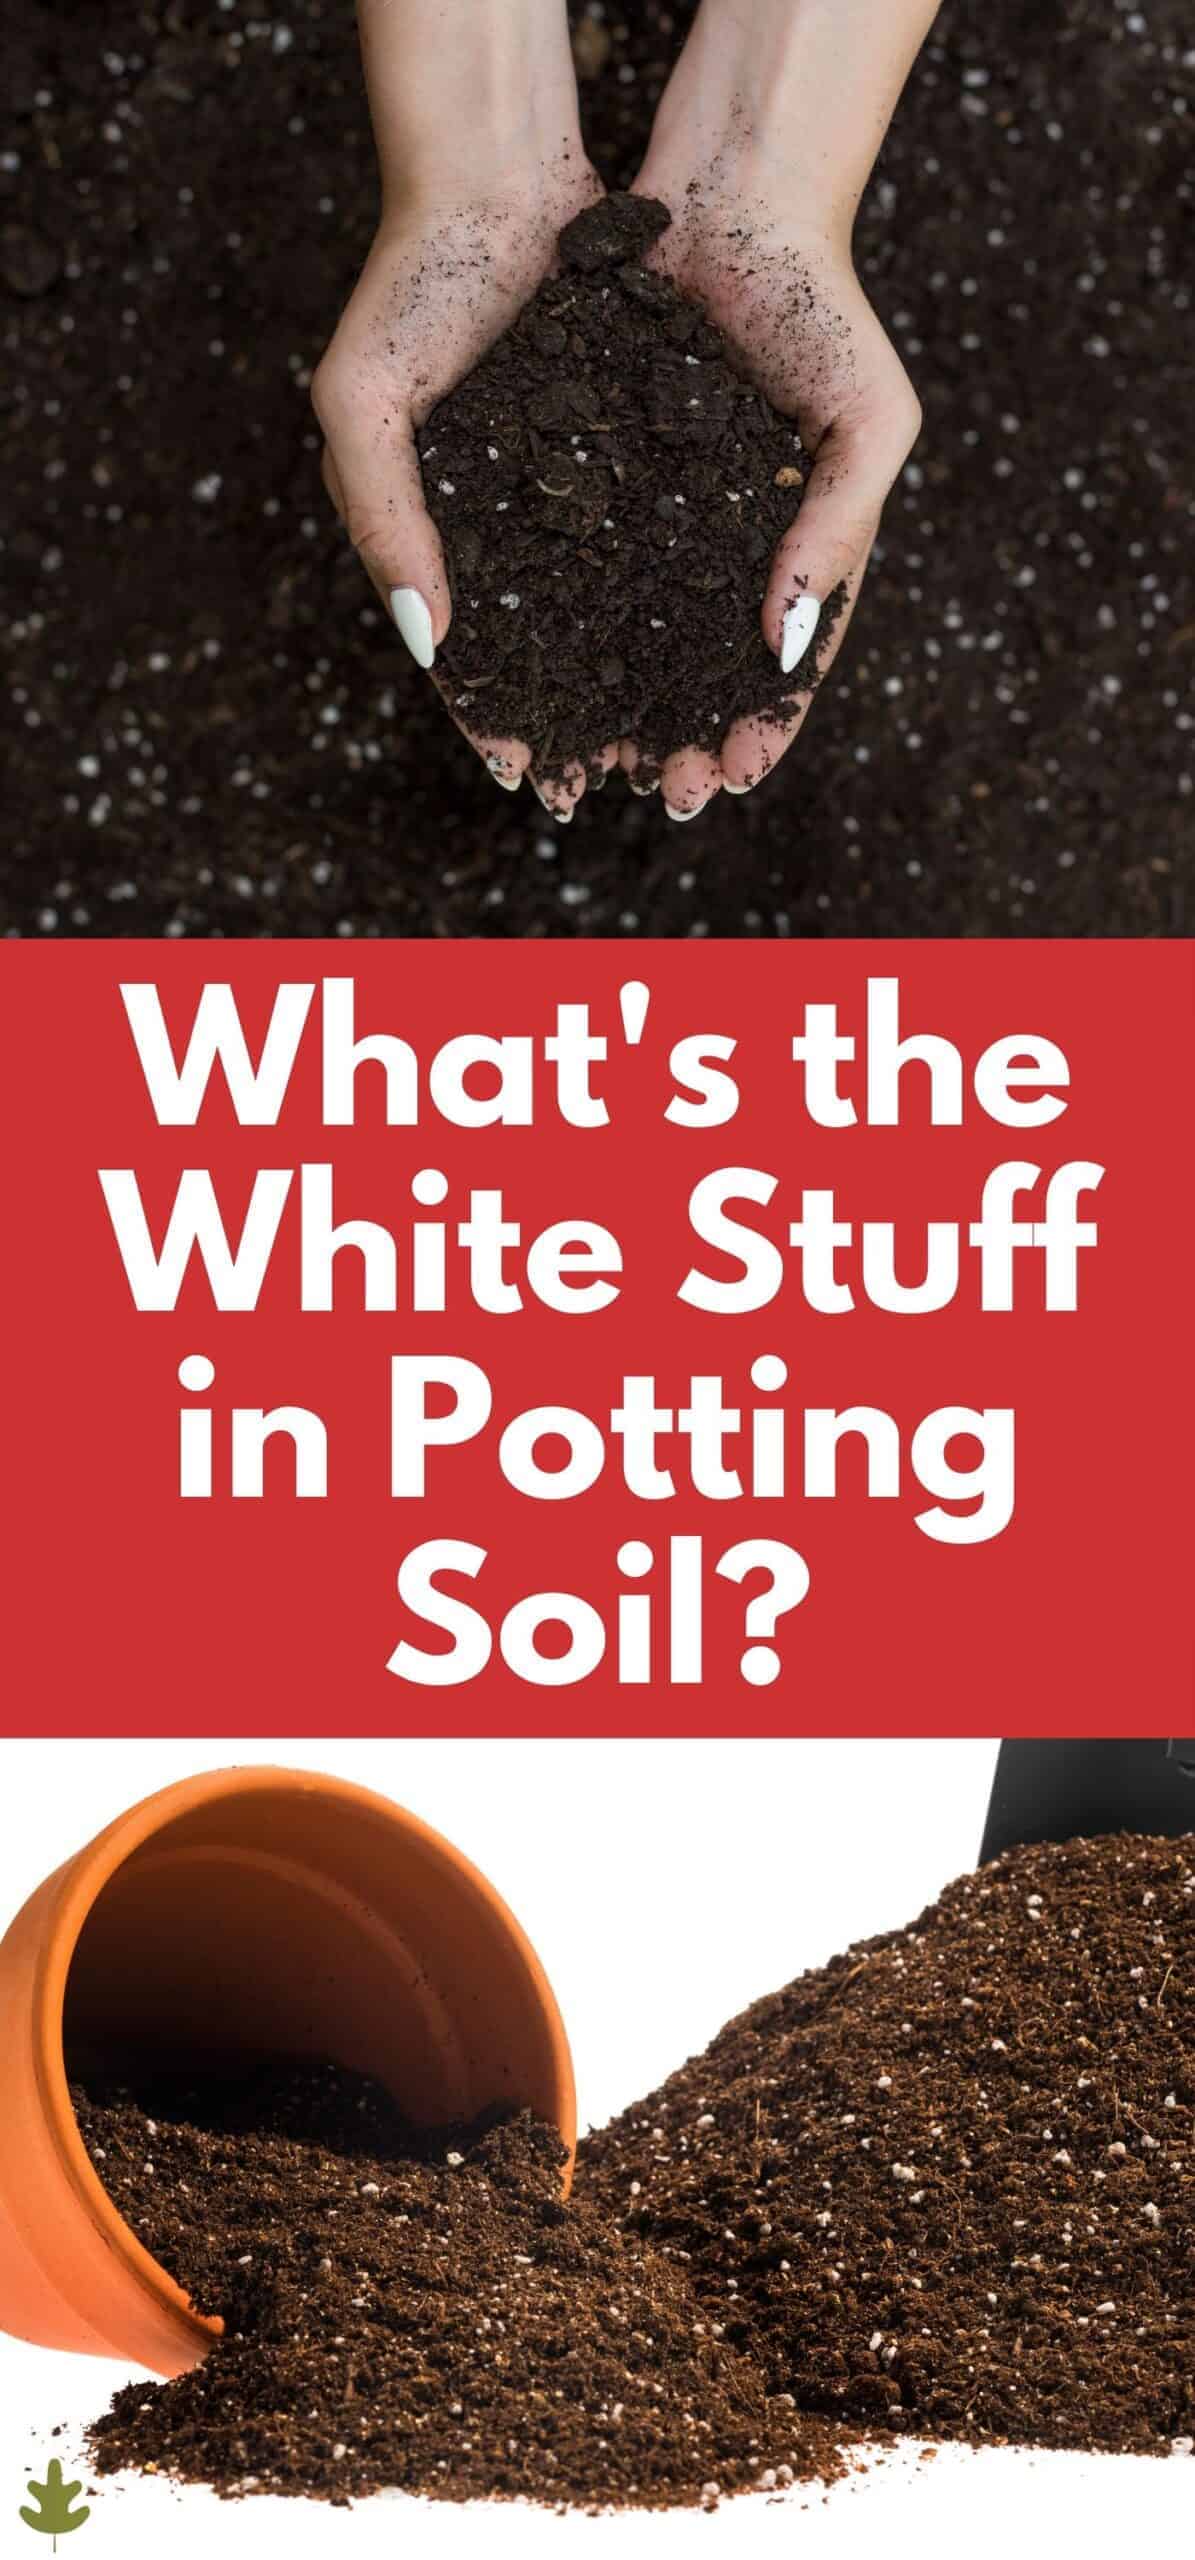 What Is The White Stuff In Potting Soil?